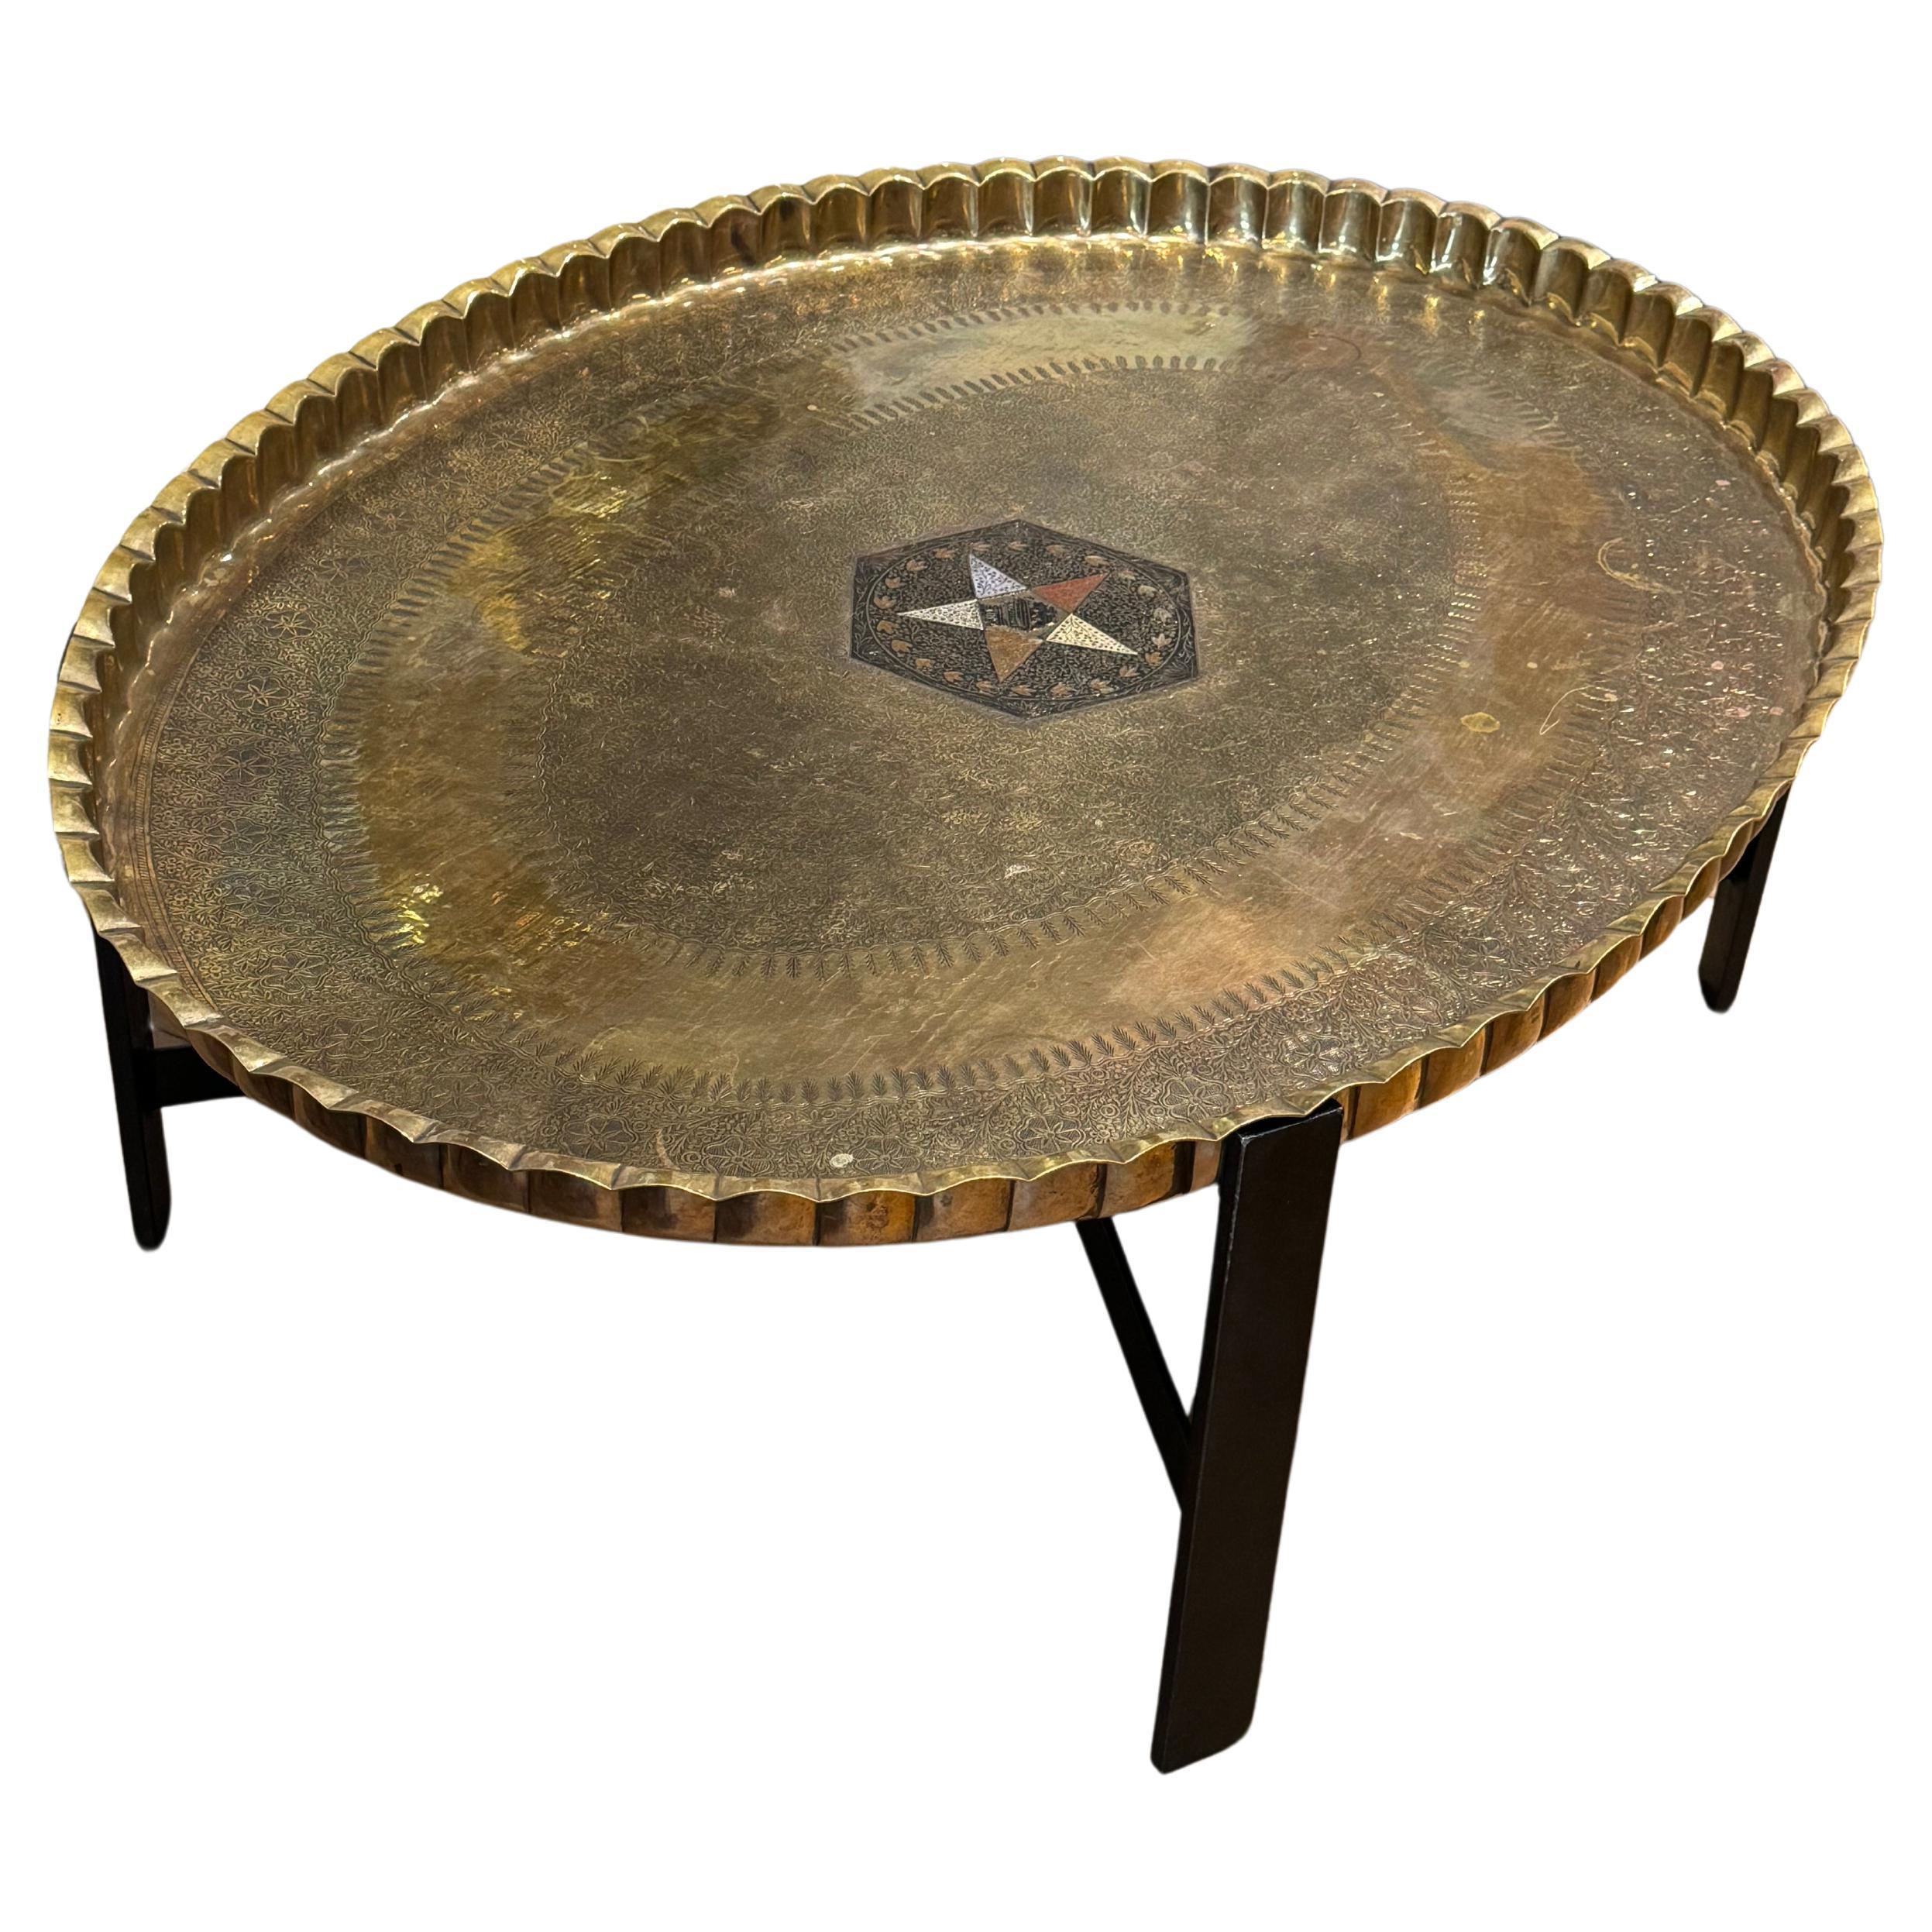 Repoussé Moroccan Hand Texted Brass Coffee Table, Circa 1930 